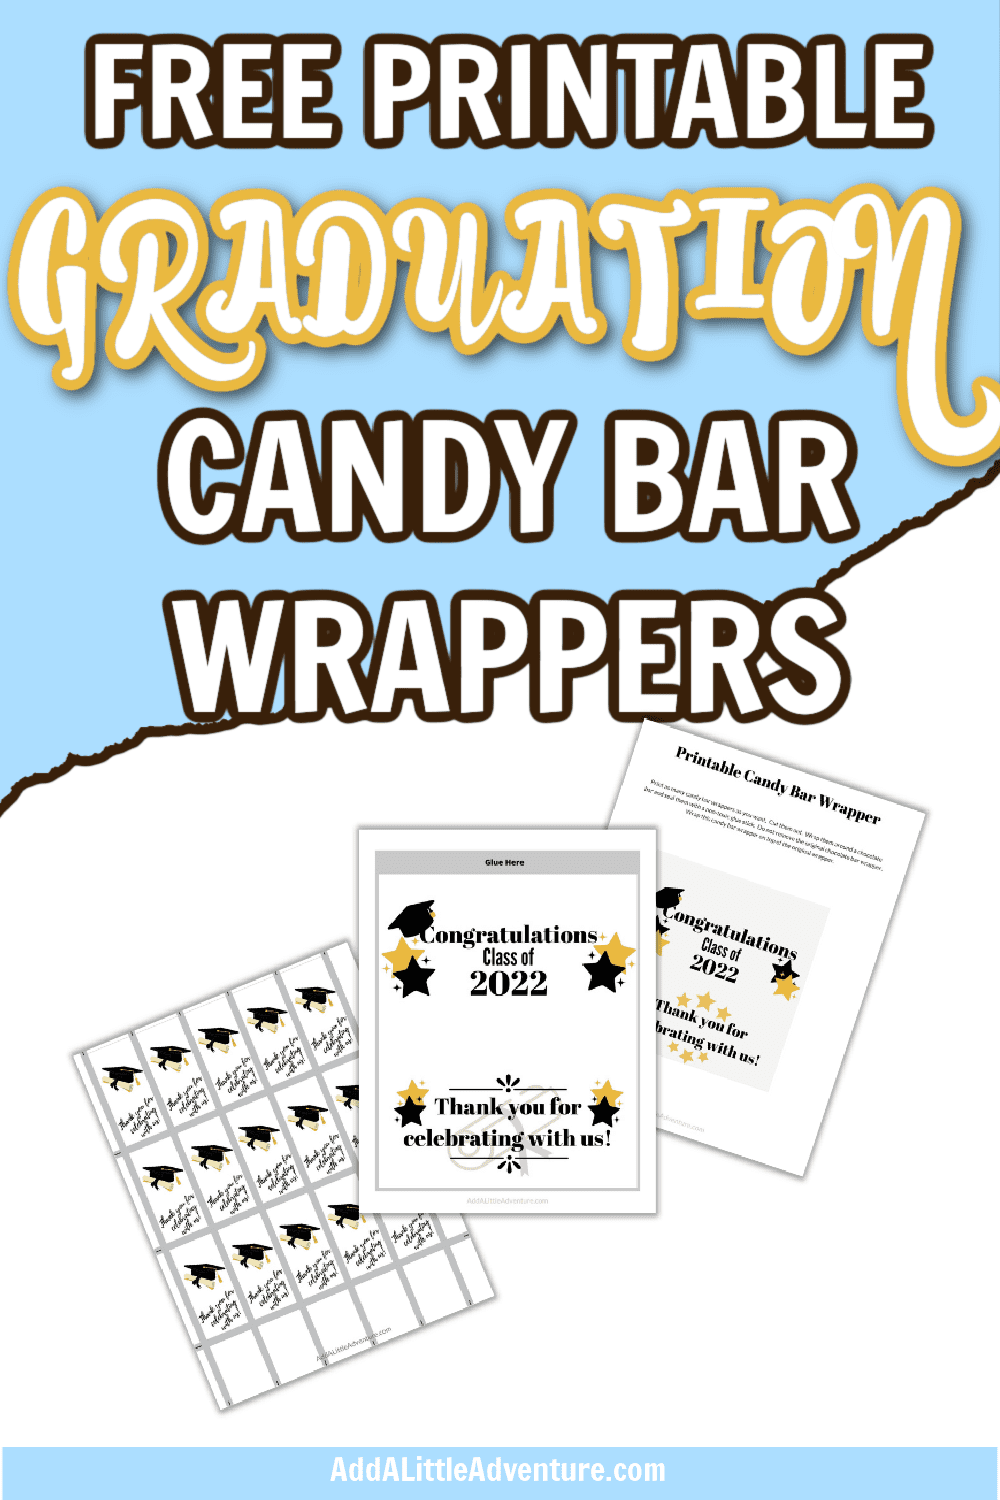 Graduation Candy Bar Wrappers Free Printables Add A Little Adventure Graduation Candy Bar Graduation Candy Candy Bar Wrappers